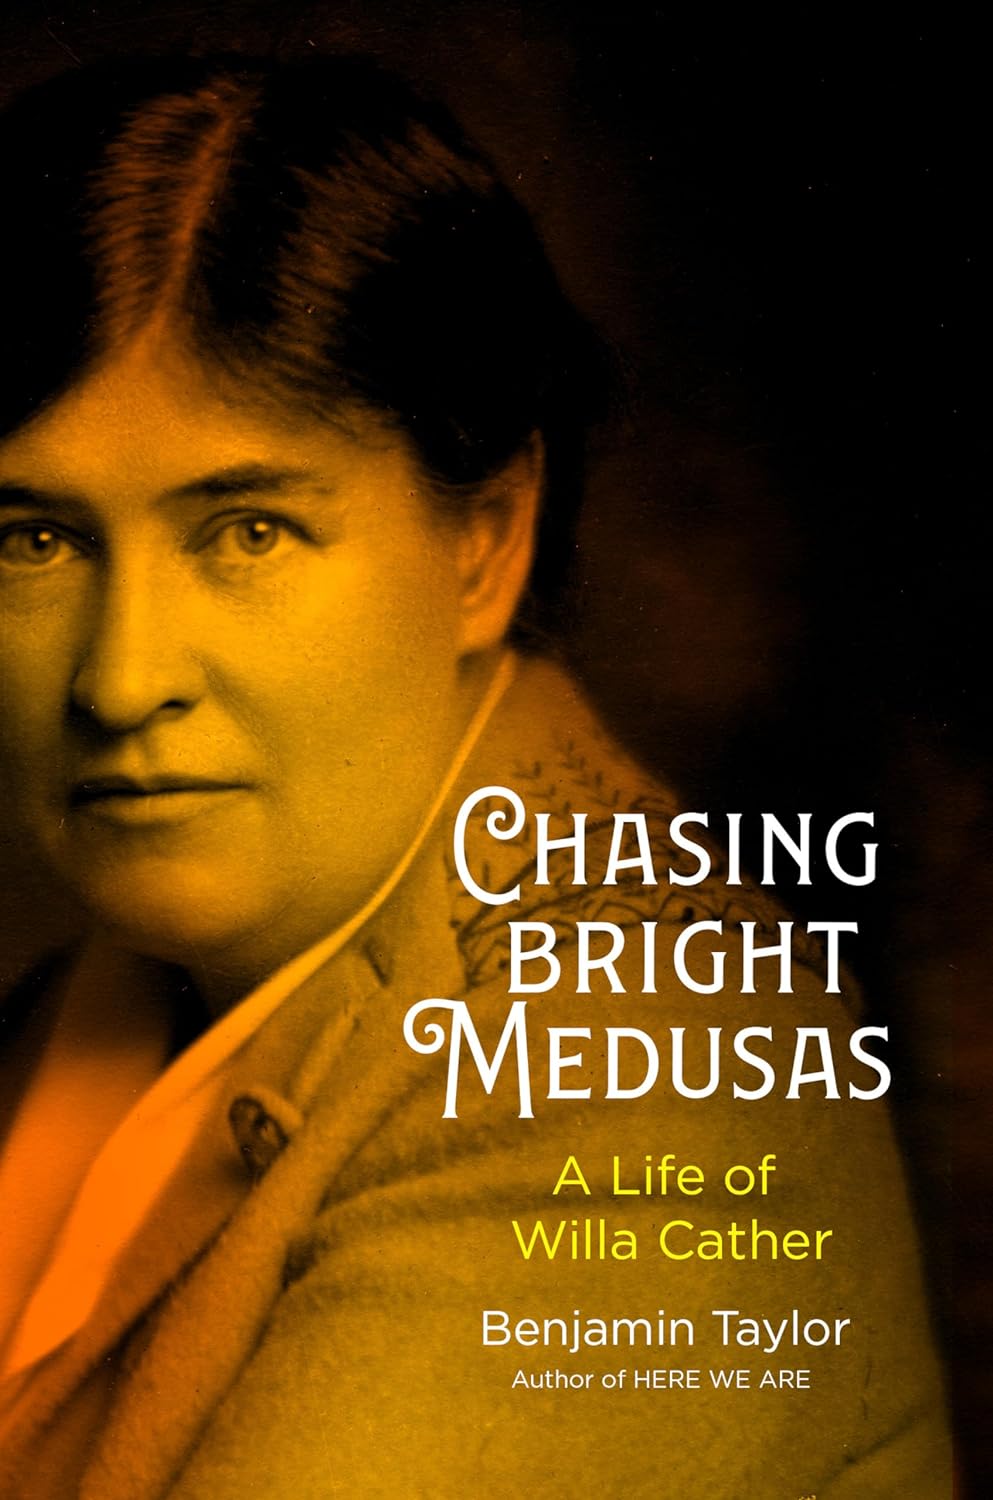 The cover of Chasing Bright Medusas: A Life of Willa Cather